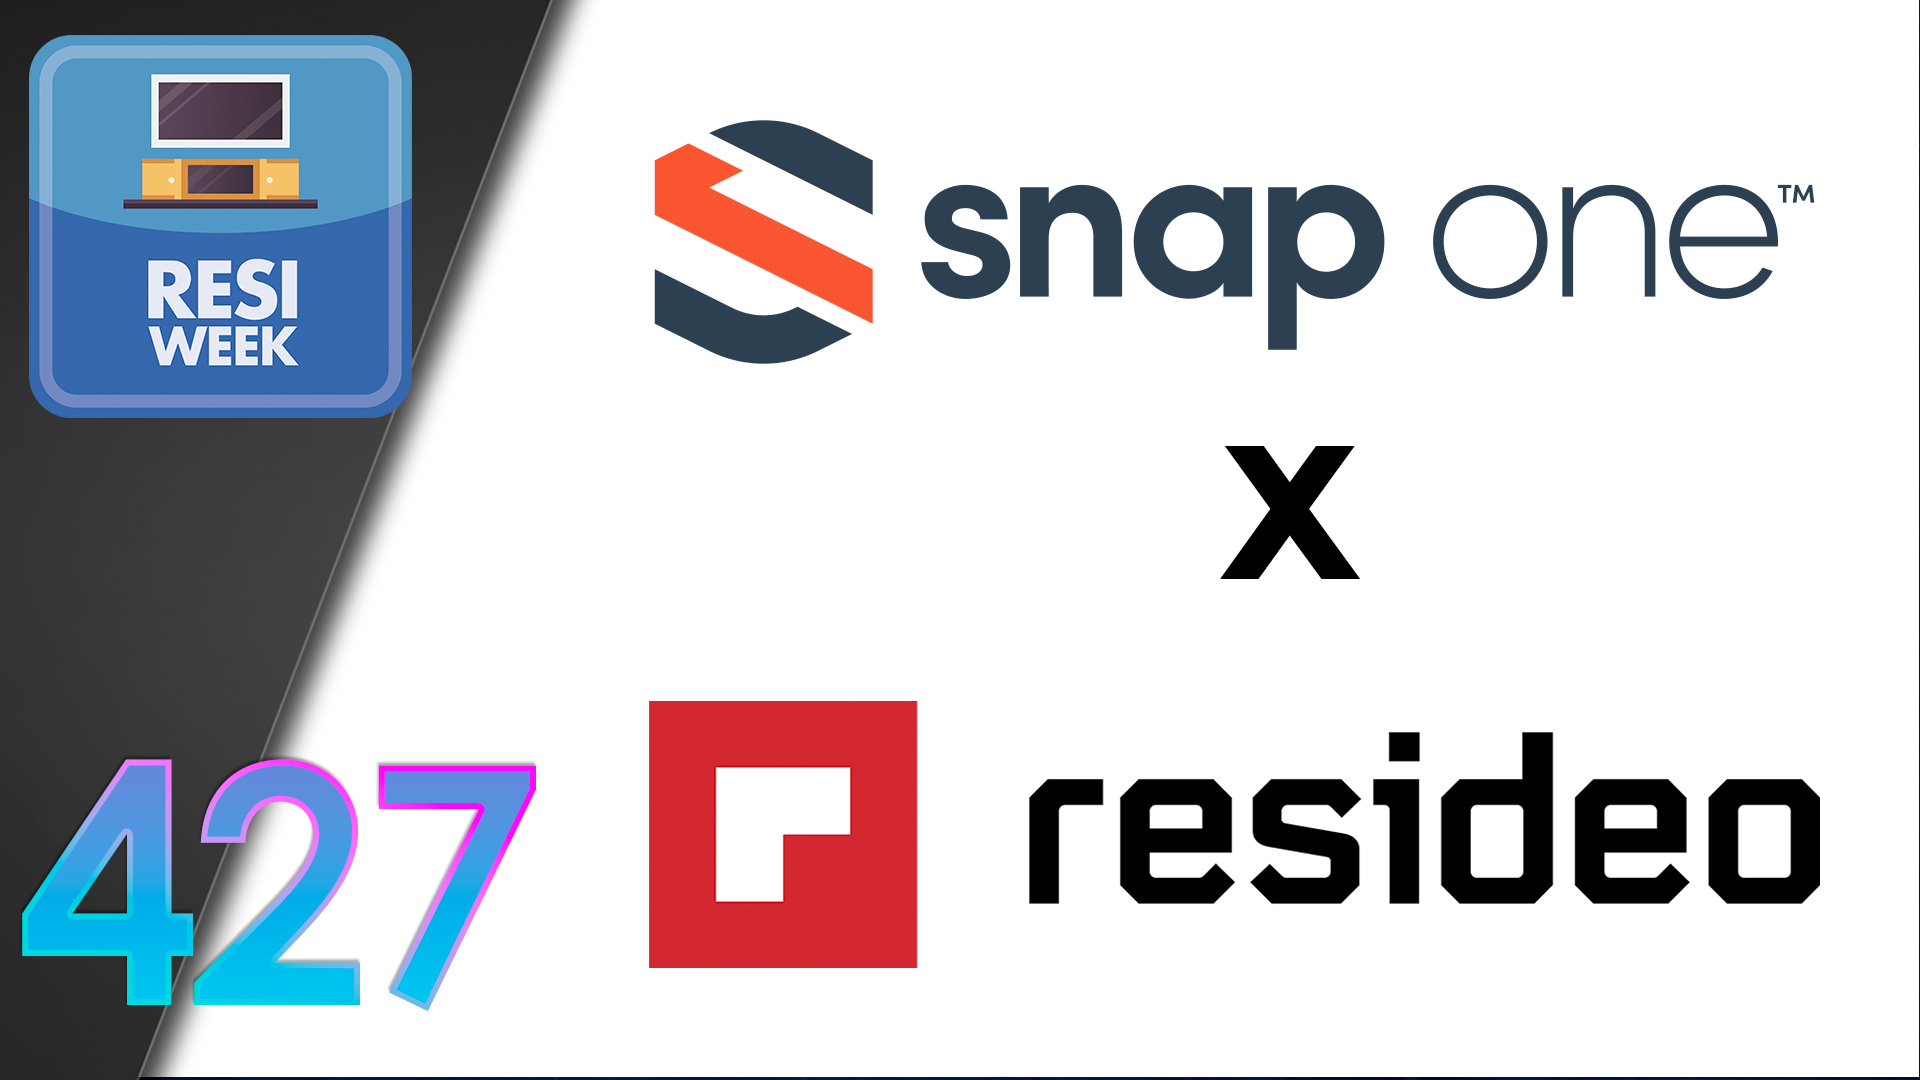 Resideo acquires Snap One for $1.4 billion, and understanding the things that are in your control when running a business.